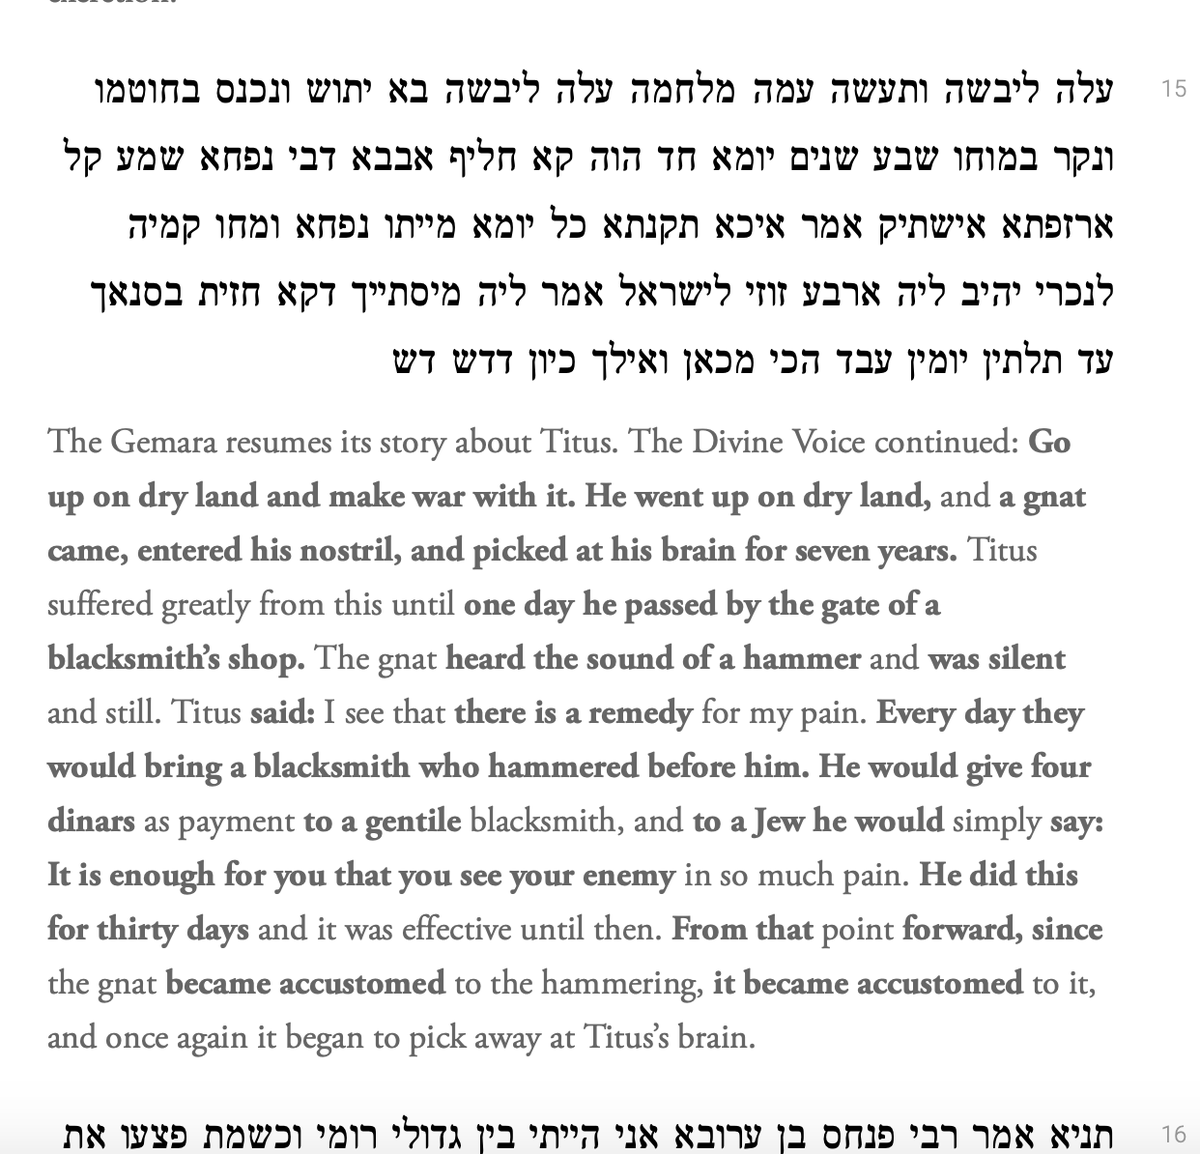 The Talmud (BT Gittin 56b) has a very similar story, but about Titus.The idea expressed here -- & also by al-Tabari -- is that God brings down the mighty Nimrod by the lowliest of his creatures.(via  http://sefaria.org )